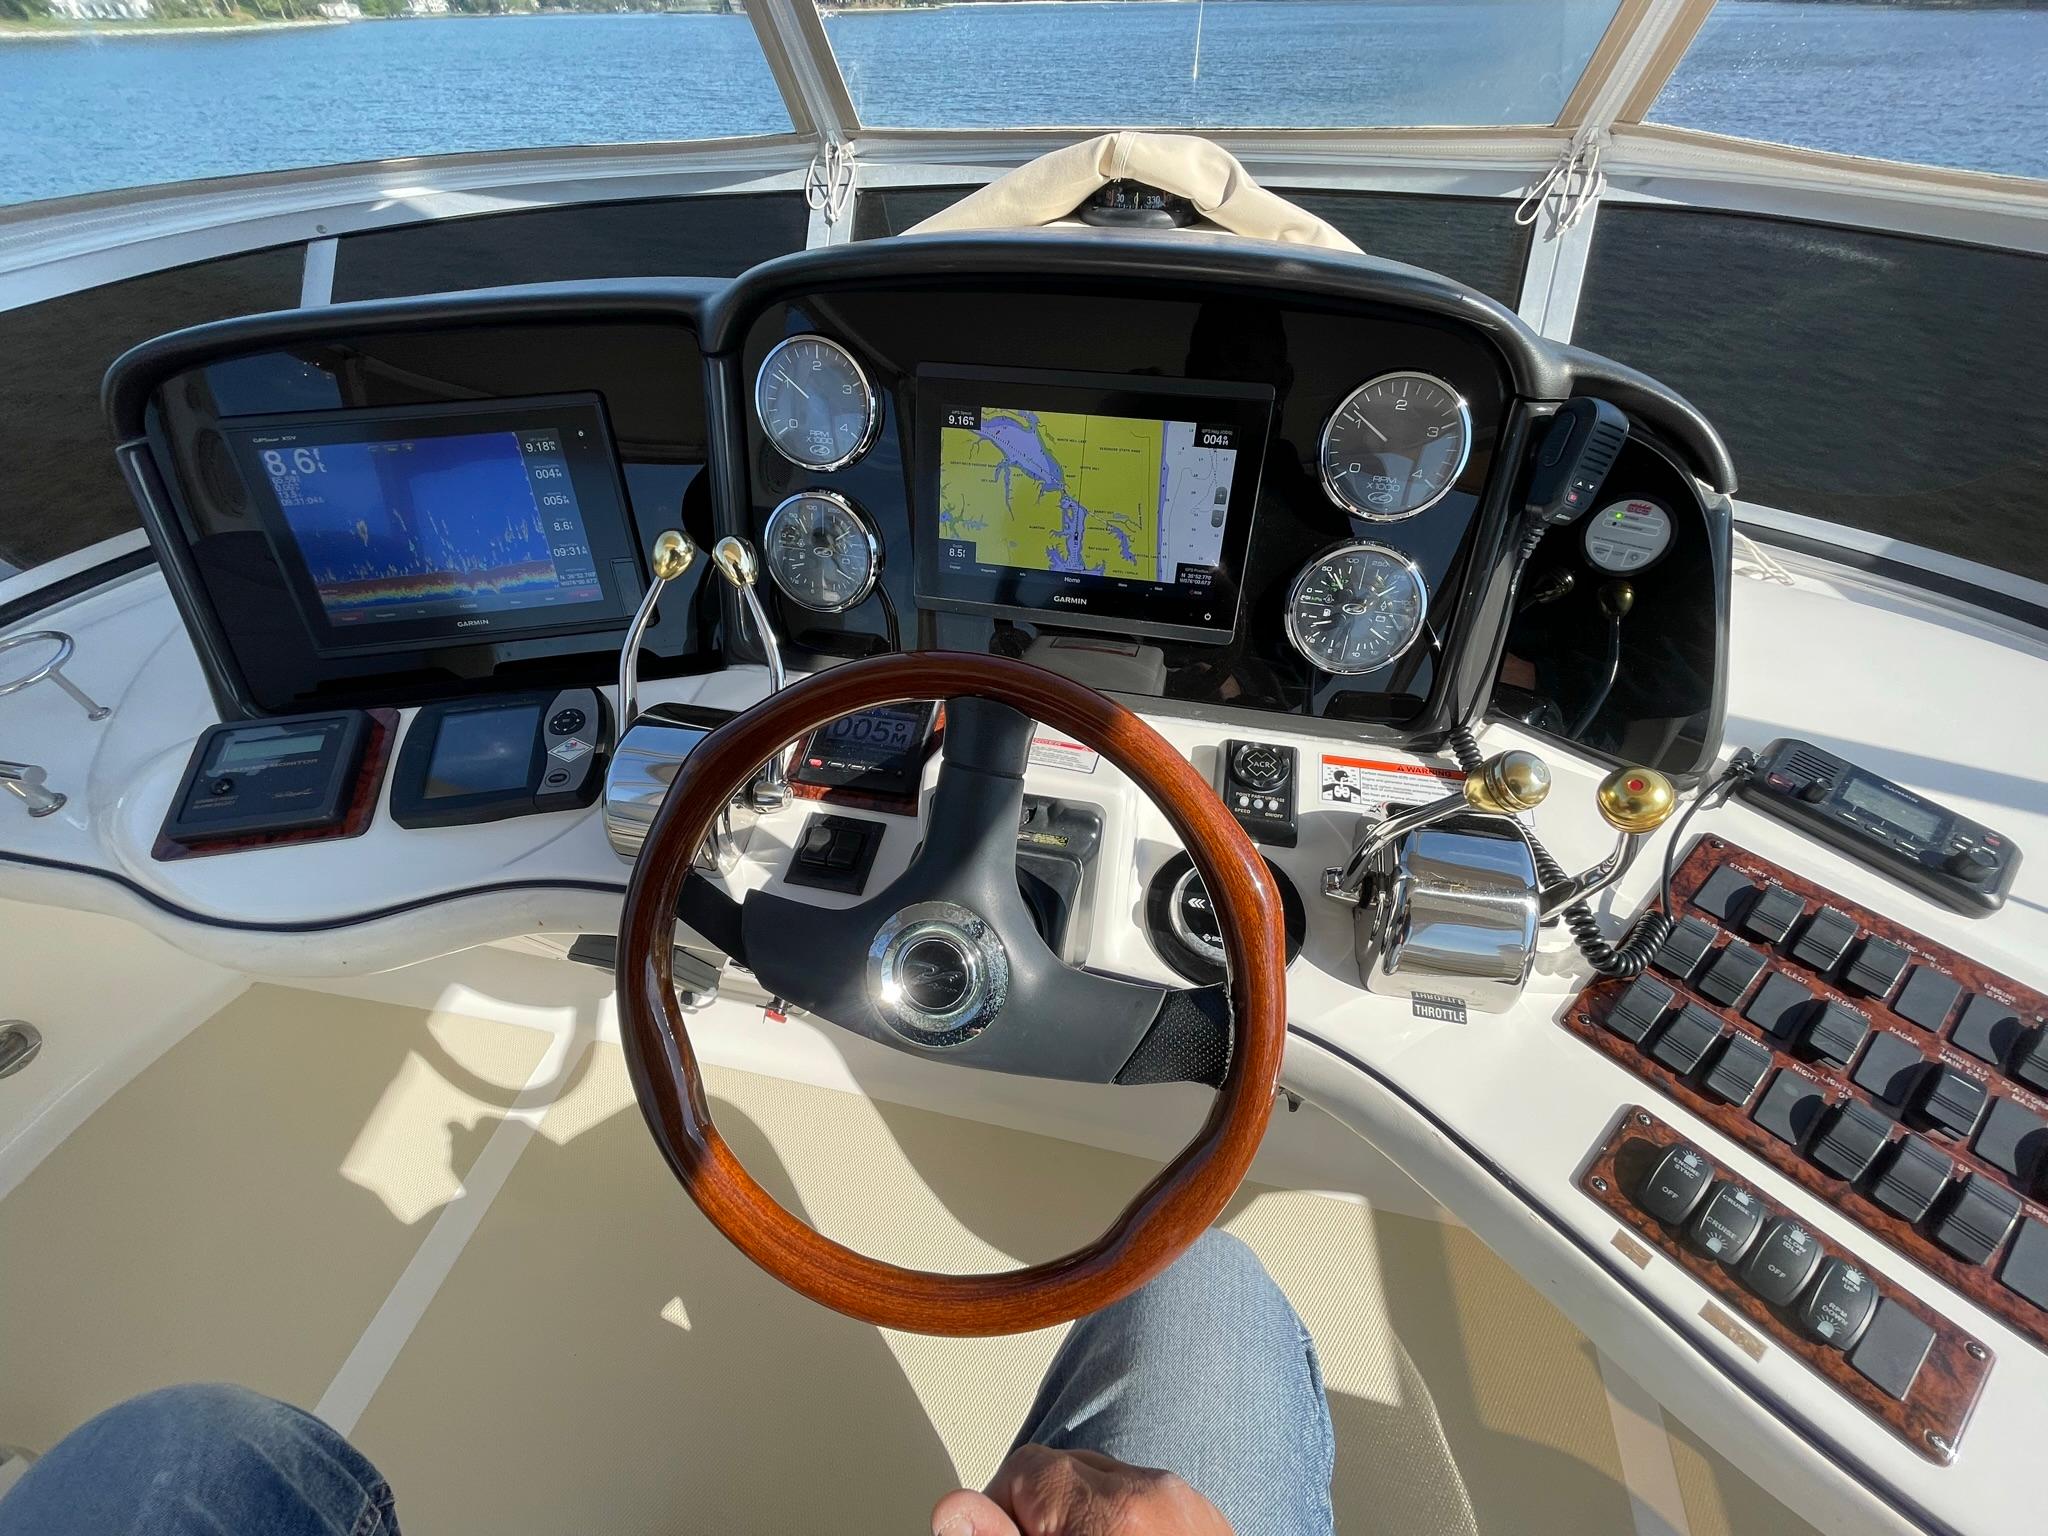 HELM OVERVIEW WITH UPDATED GARMIN 12" TOUCHSCREEN MFD'S